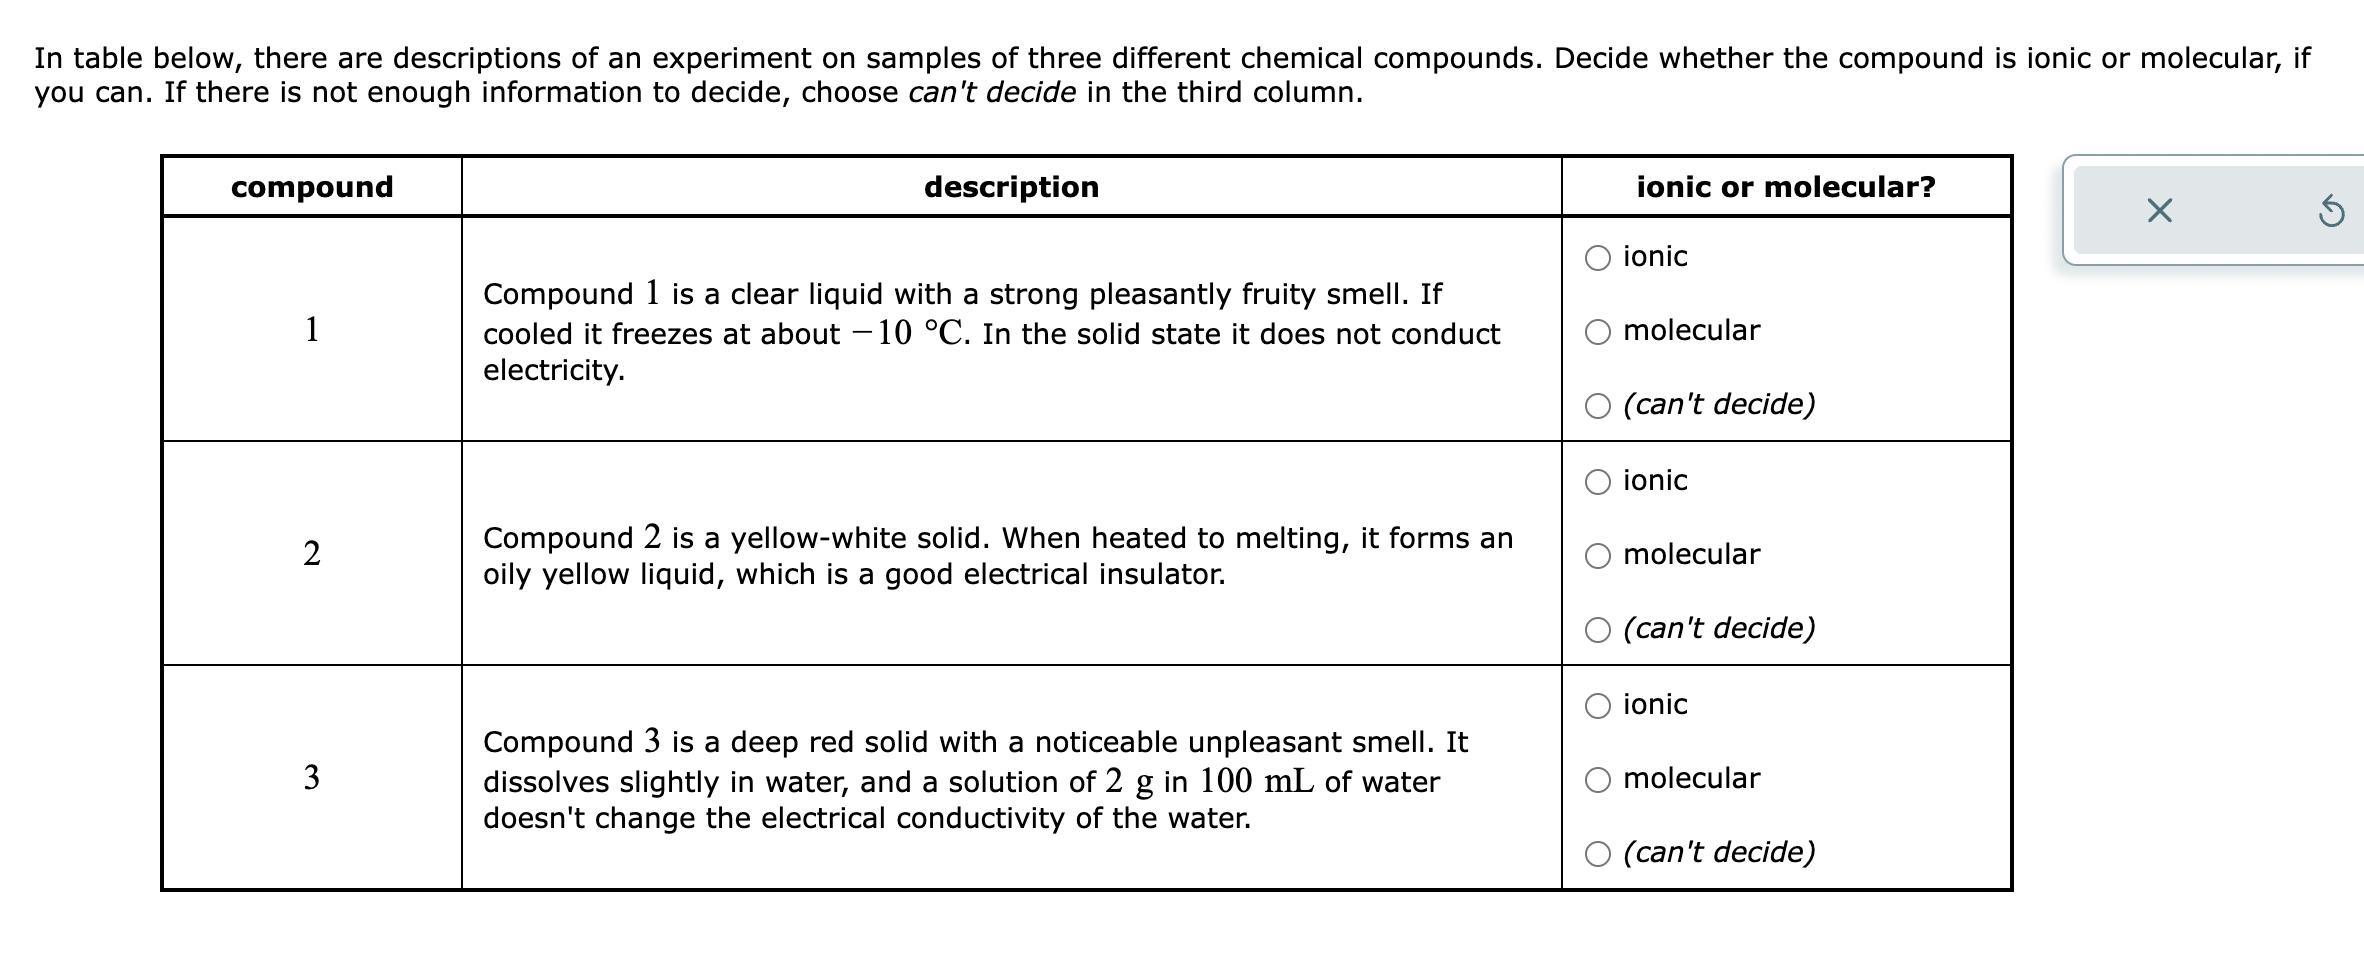 In table below, there are descriptions of an experiment on samples of three different chemical compounds.